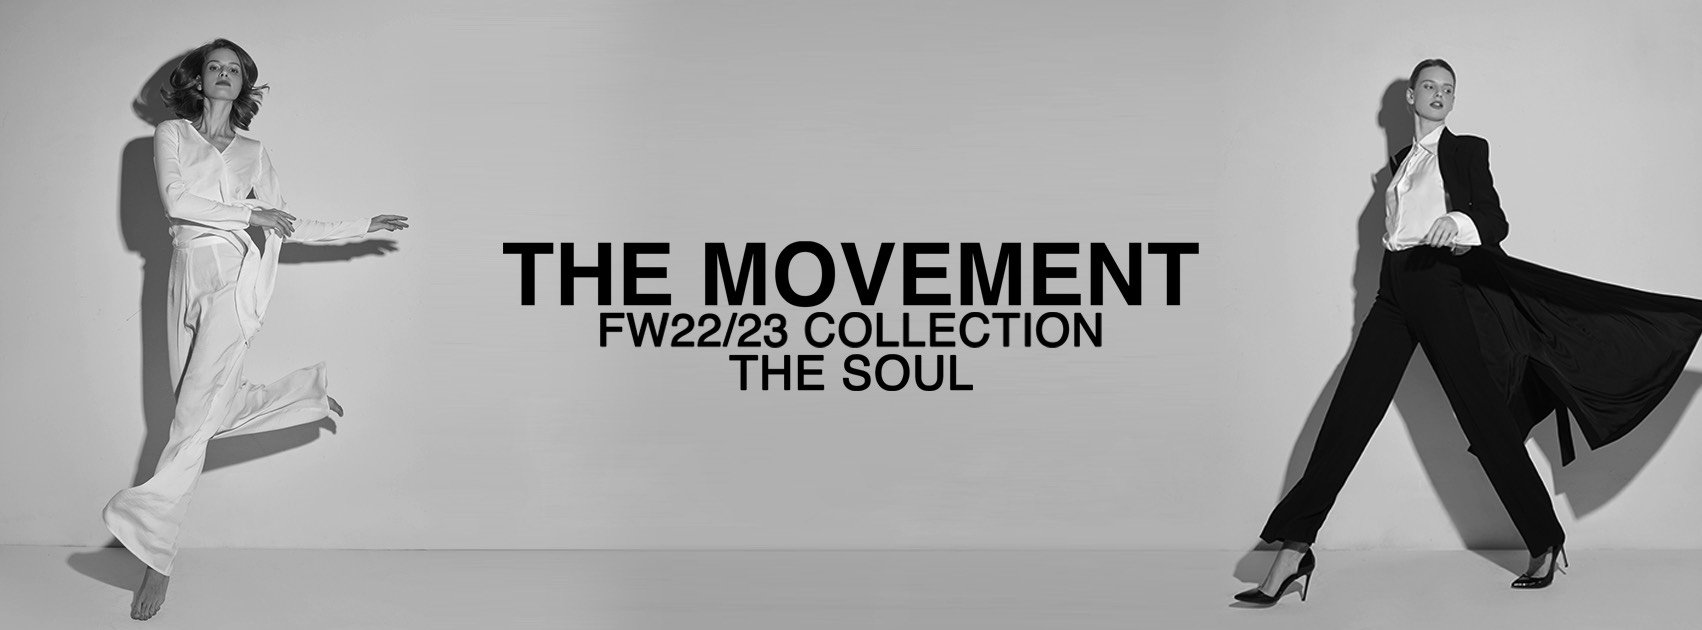 The Movement- FW 22/23 Collection